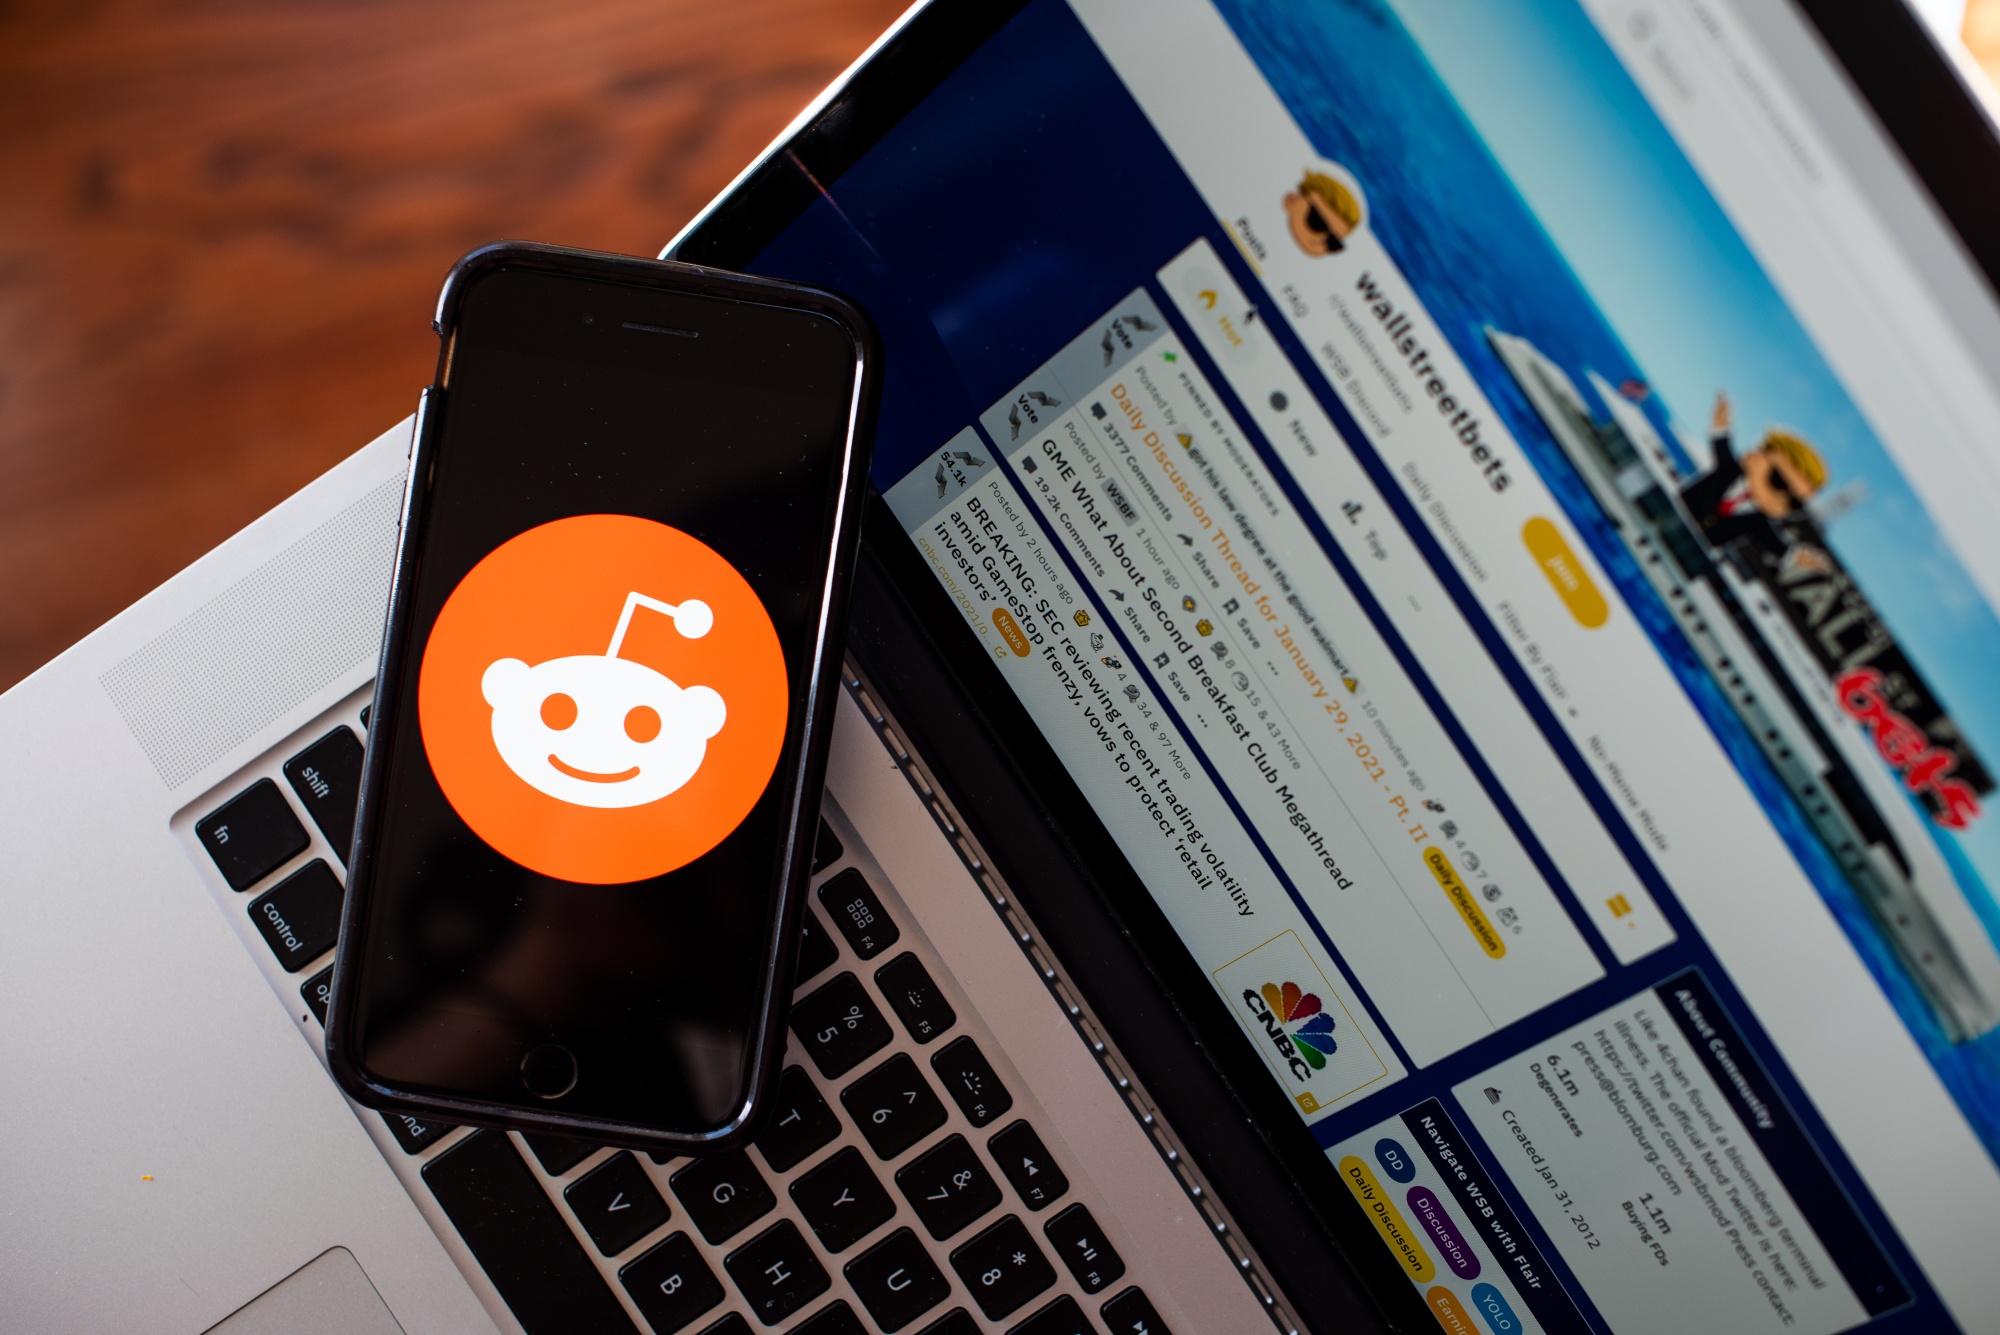 Reddit (RDDT), Shareholders Guide IPO Price at Top of Range or Above 